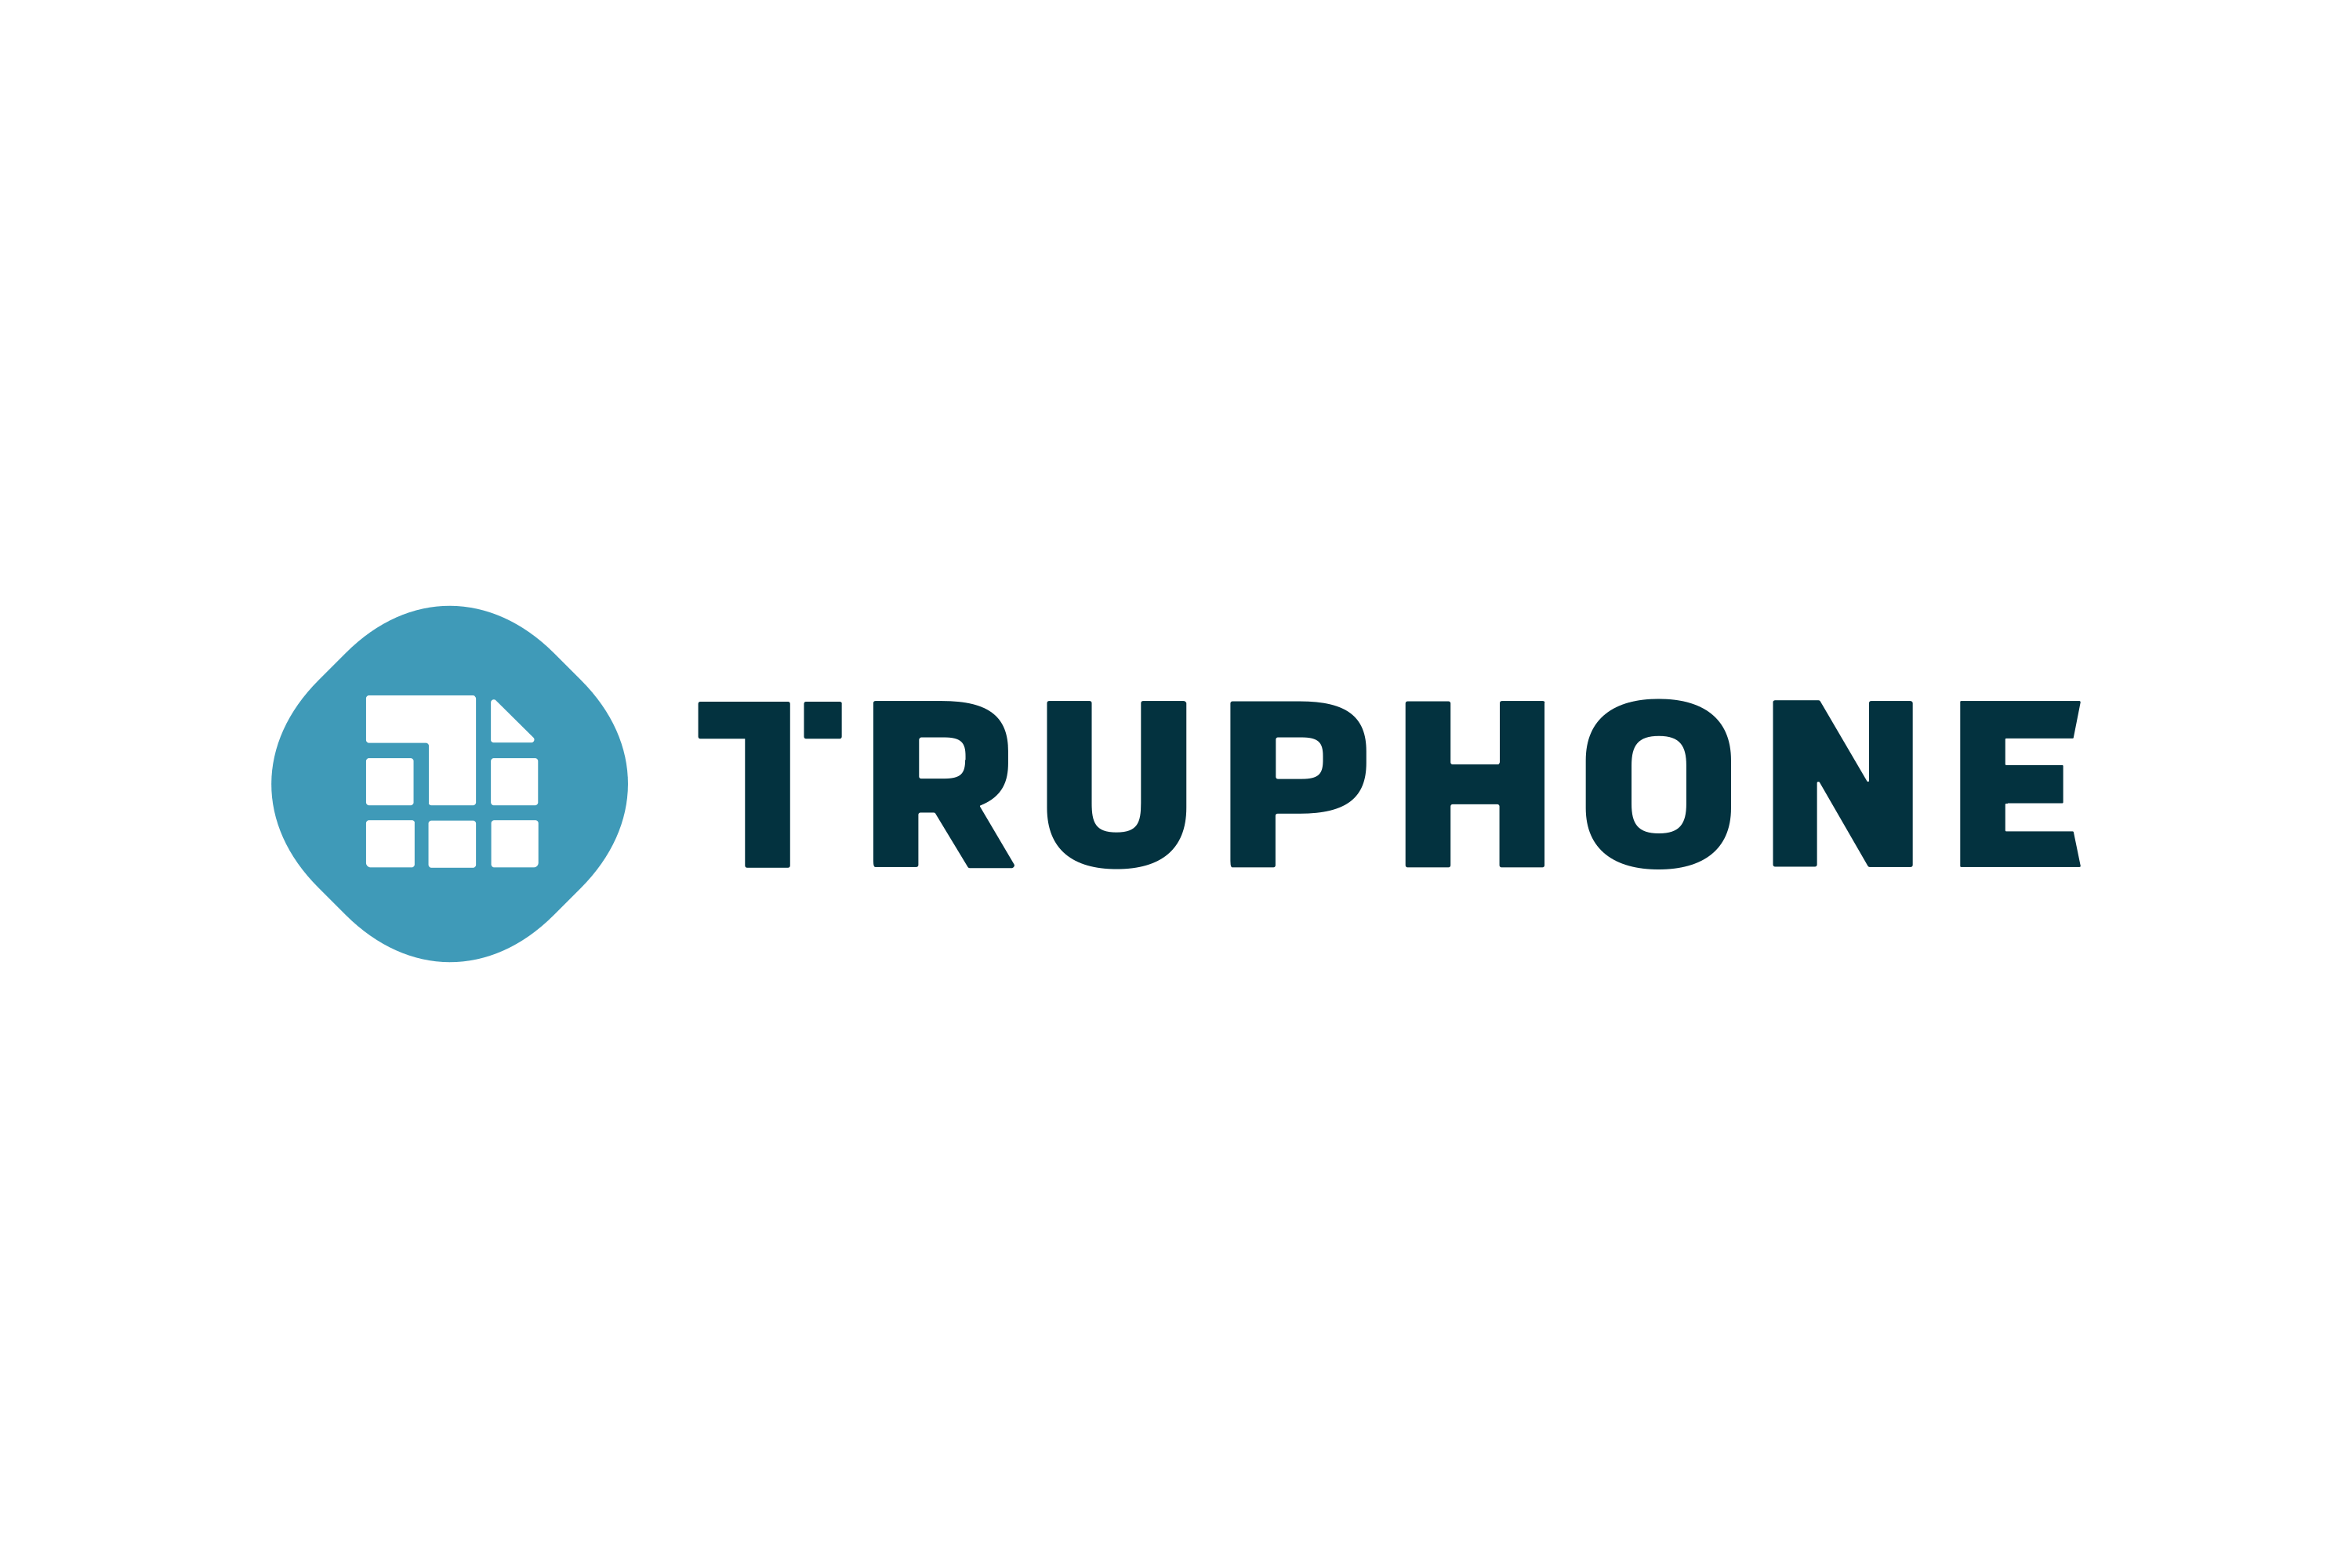 Cooperation with the company - Truphone